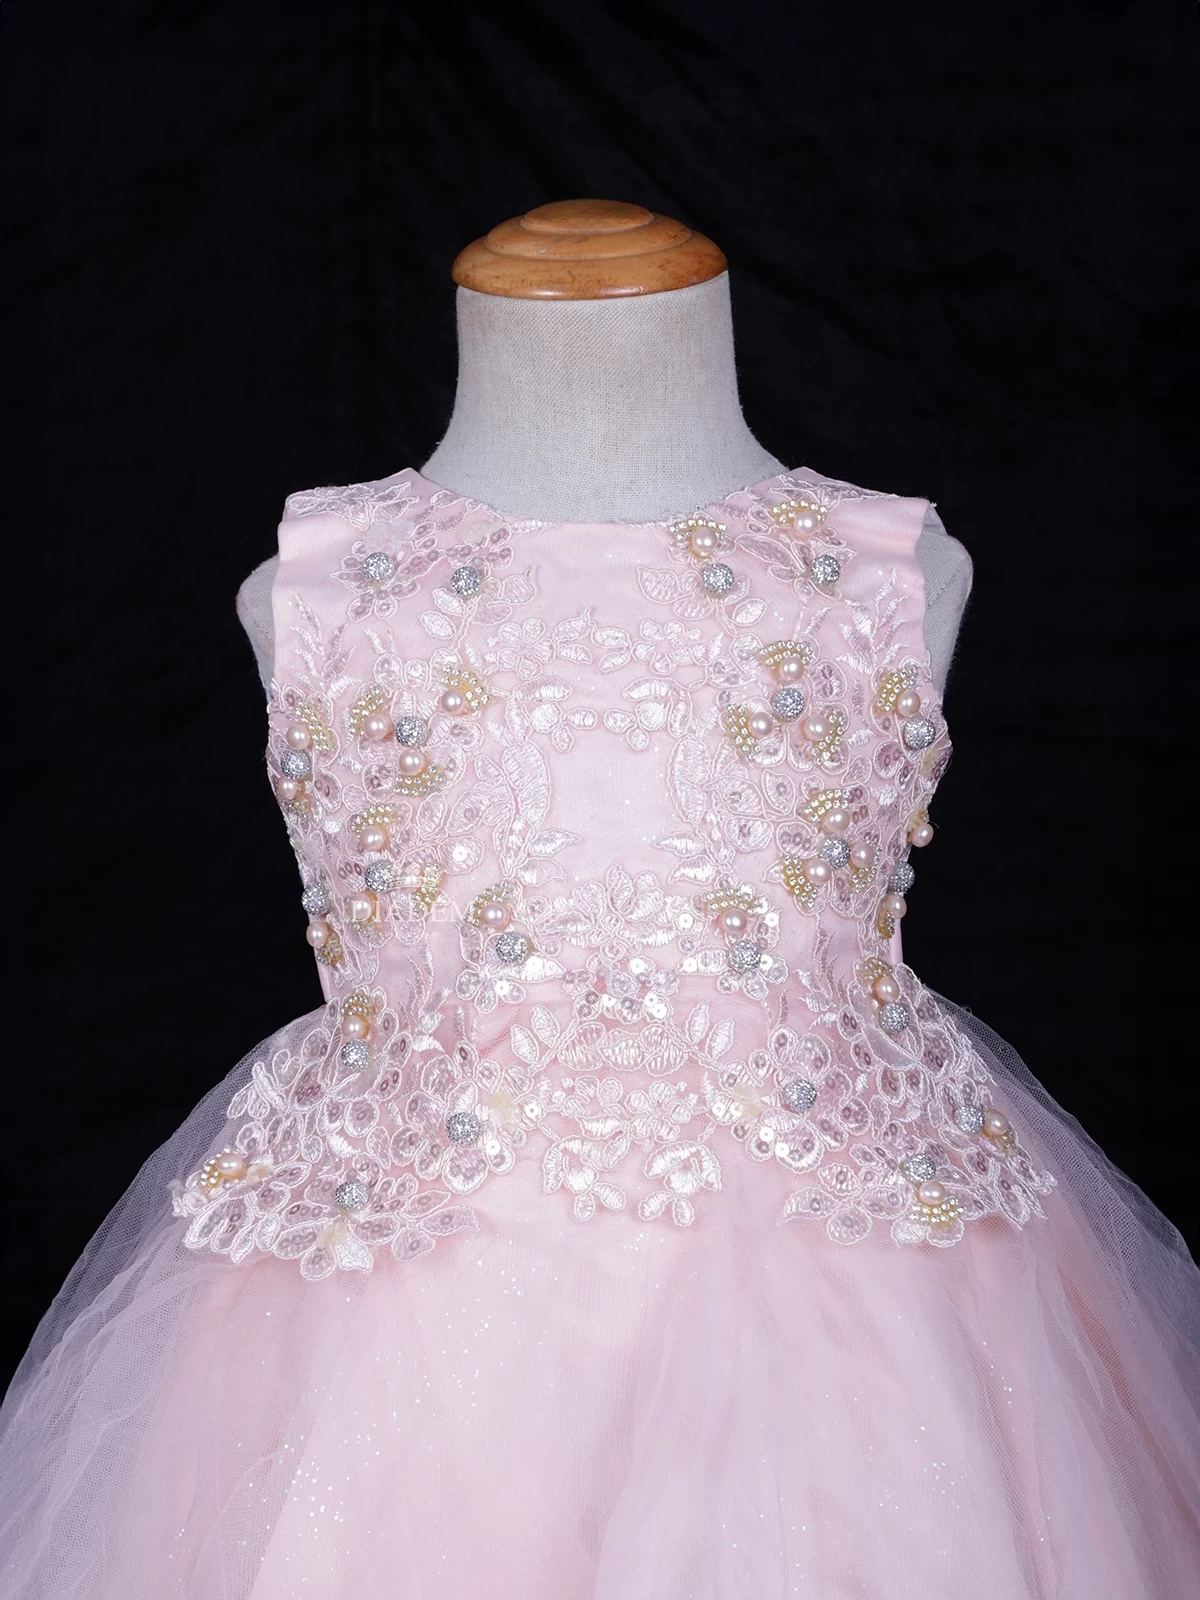 Light Peach Net Frock Embellished With Floral Laces And Pearl Beads